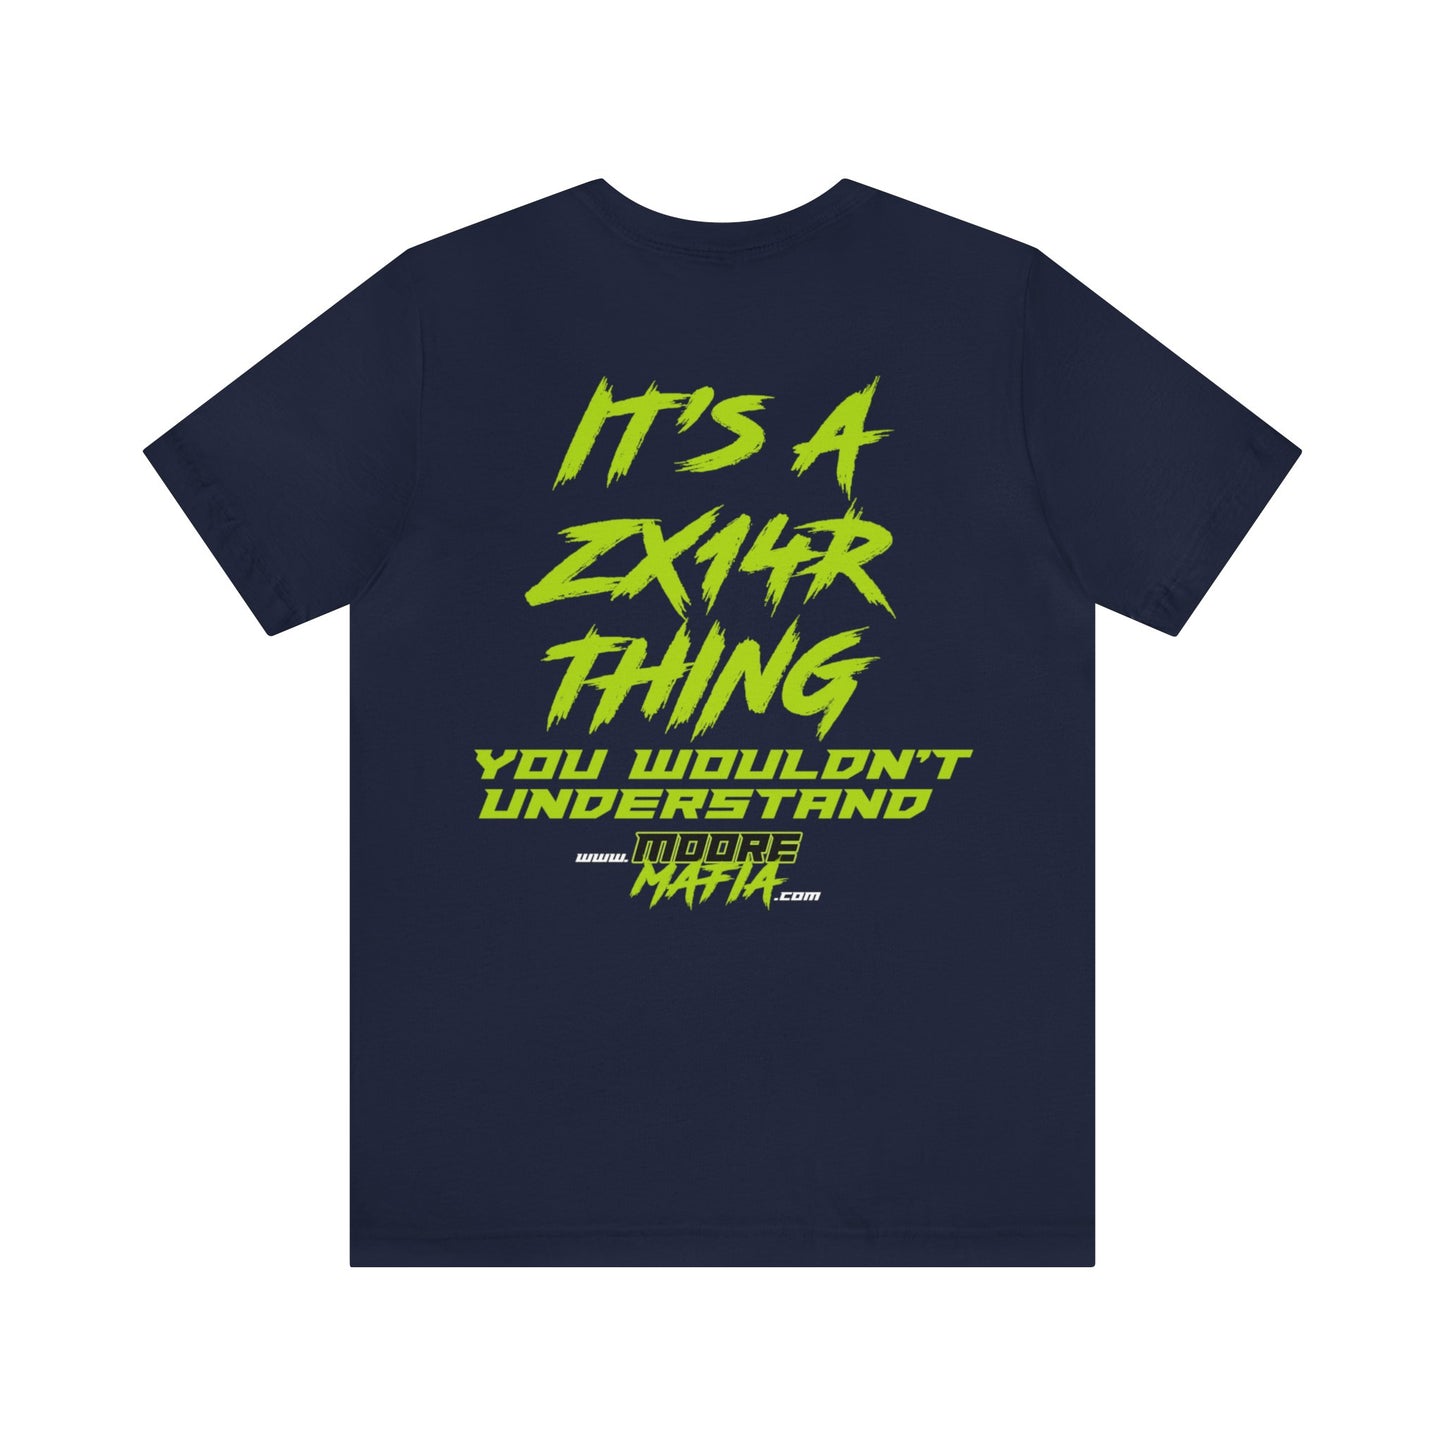 It's A ZX14R Thing Unisex T-Shirt